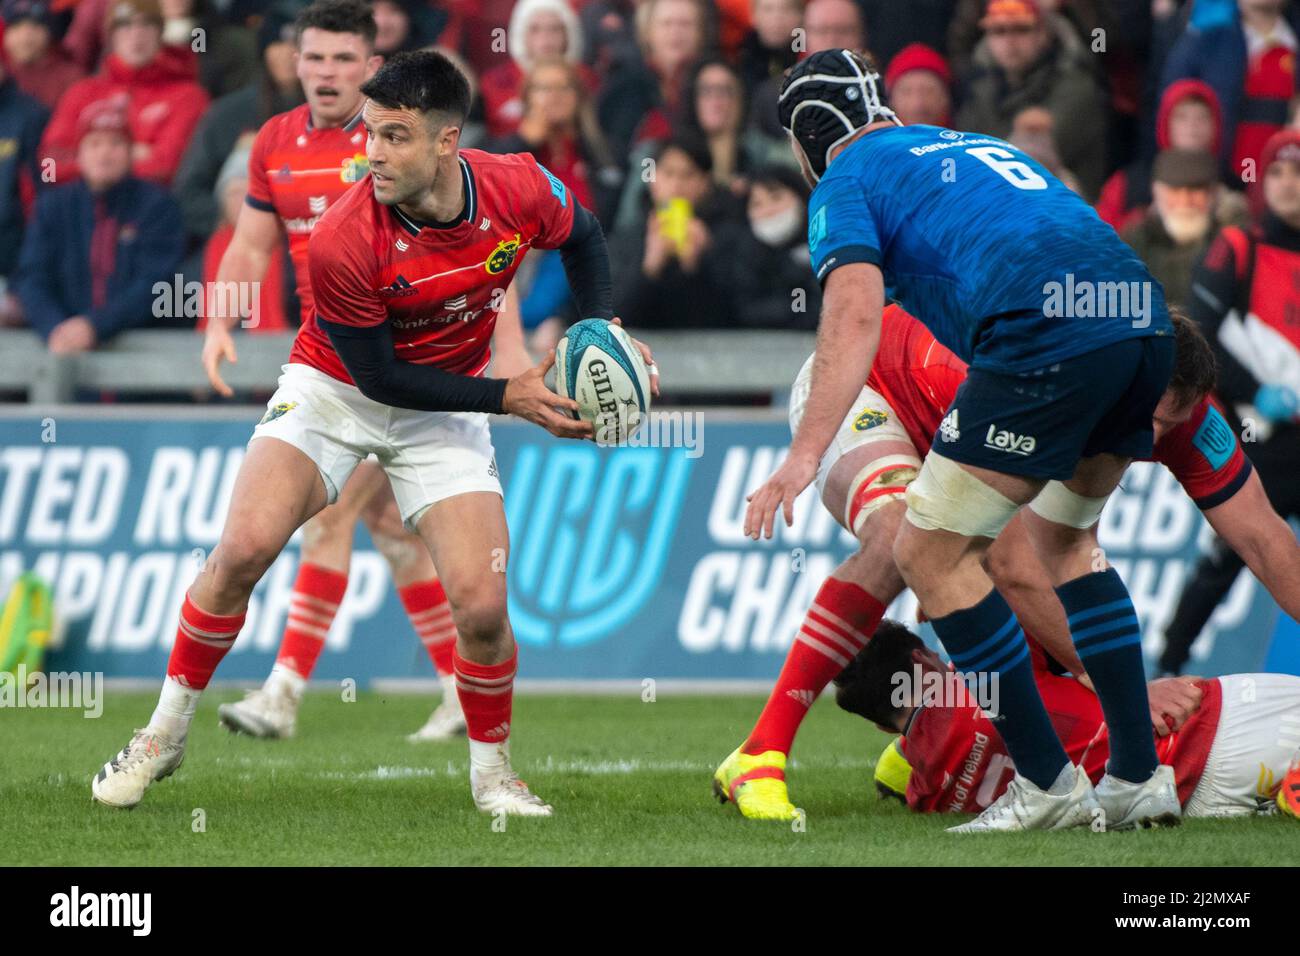 Conor Murray of Munster with the ball during the United Rugby Championship Round 15 match between Munster Rugby and Leinster Rugby at Thomond Park in Limerick, Ireland on April 2, 2022 (Photo